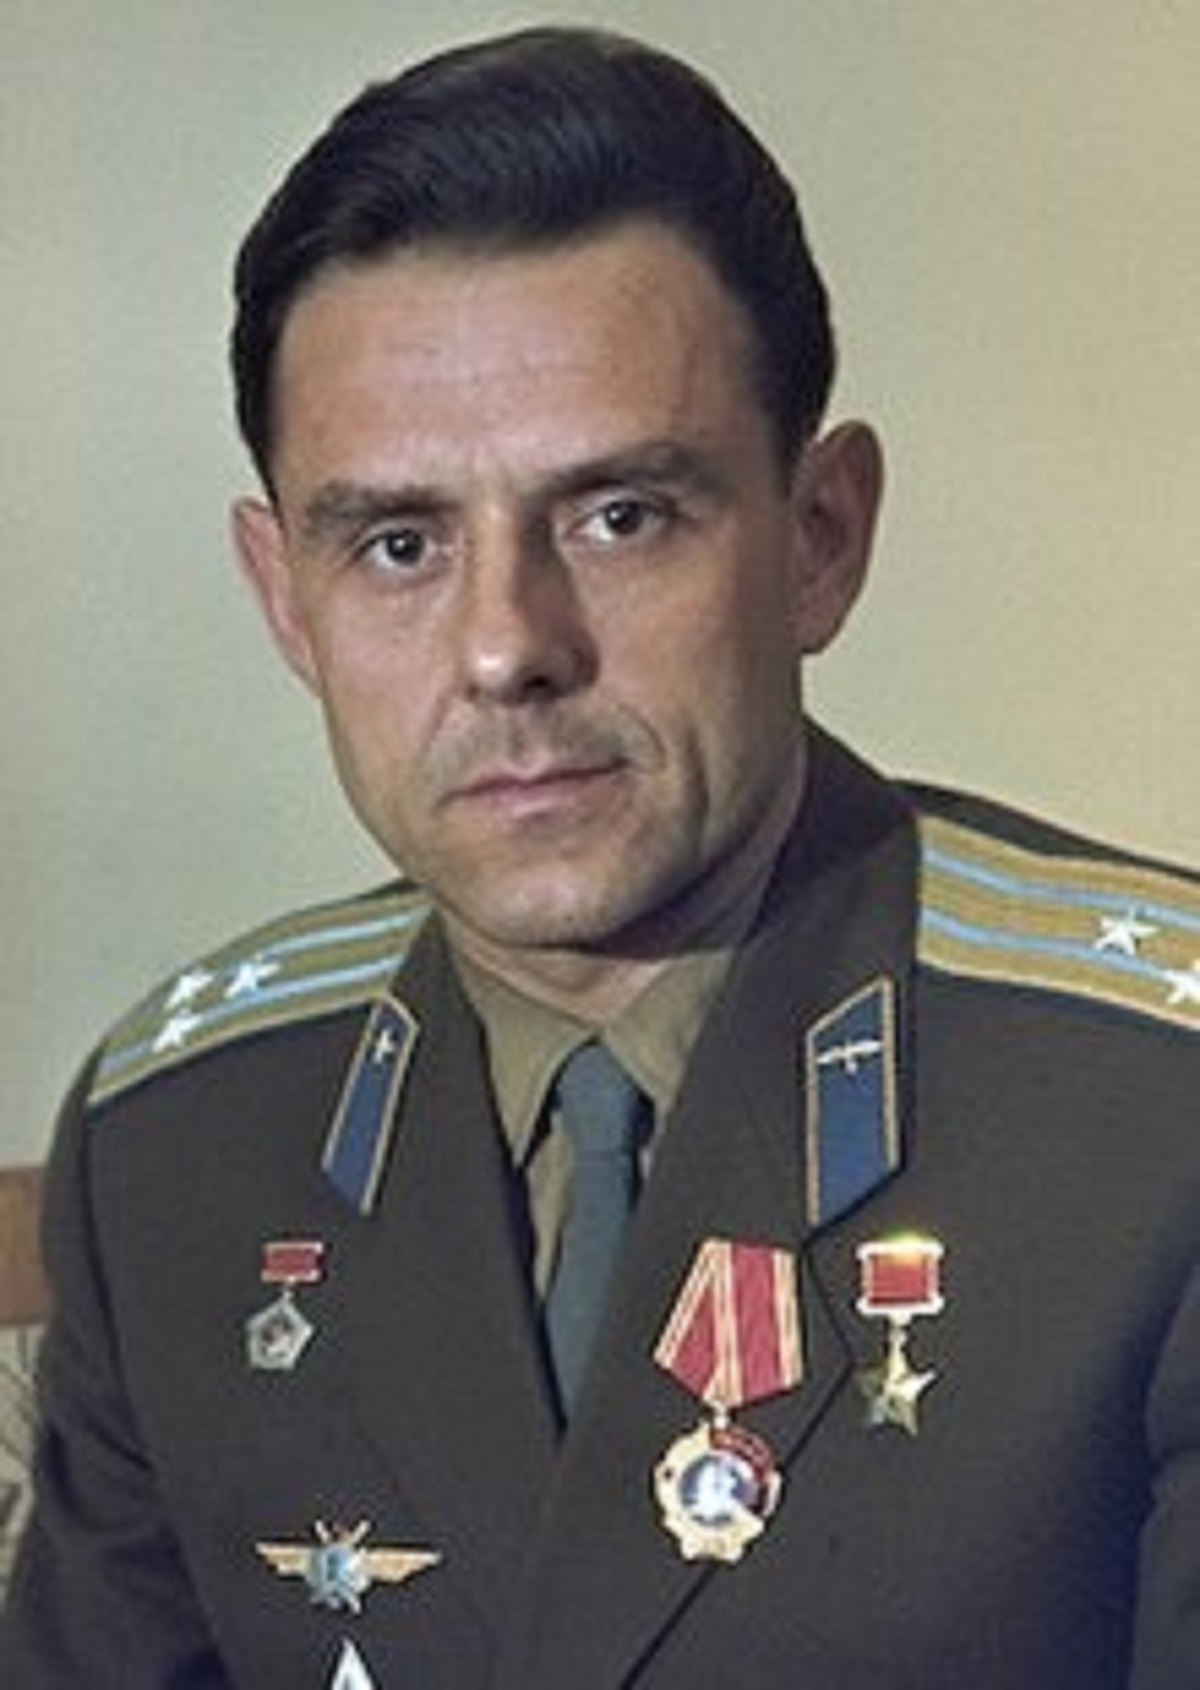 Vladimir KomarovOne of the first Russian cosmonauts. He knew the soyuz space capsule was unsafe, he told them repeatedly, but flew anyway to spare the life of his replacement pilot. Before liftoff he demanded that when he died, all officials at the kremlin would have to attend his funeral and see what they did to him. All they were able to retrieve was a charred heel bone. Top image are the kremlin officials at his open-casket funeral..